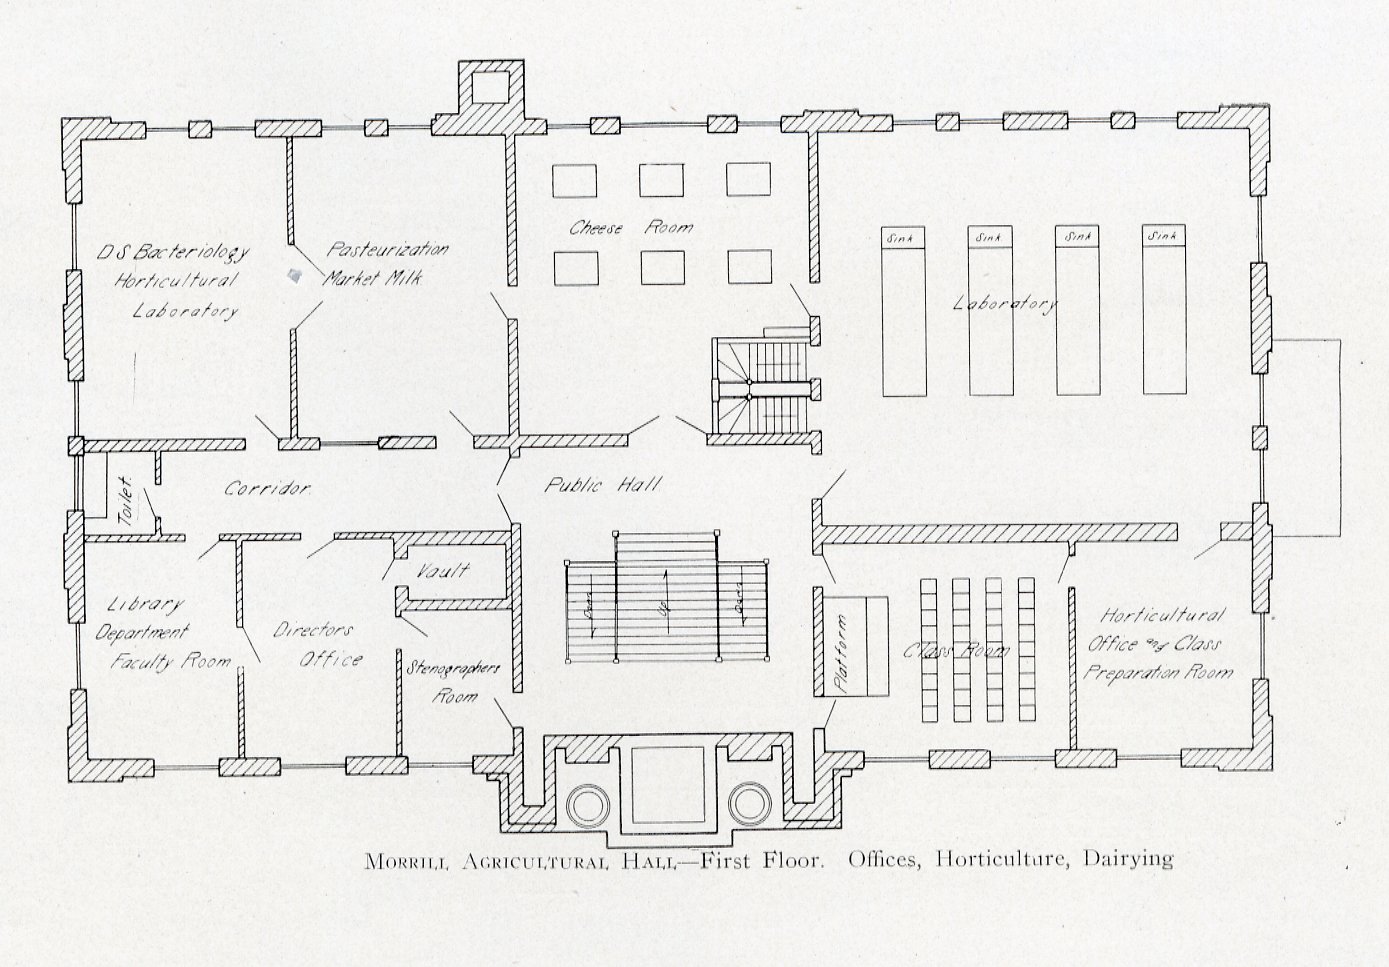 Morrill Hall first floor plan shows offices, horticulture and dairy school spaces, including the dairy school pasteurization room, cheese room, and laboratory.